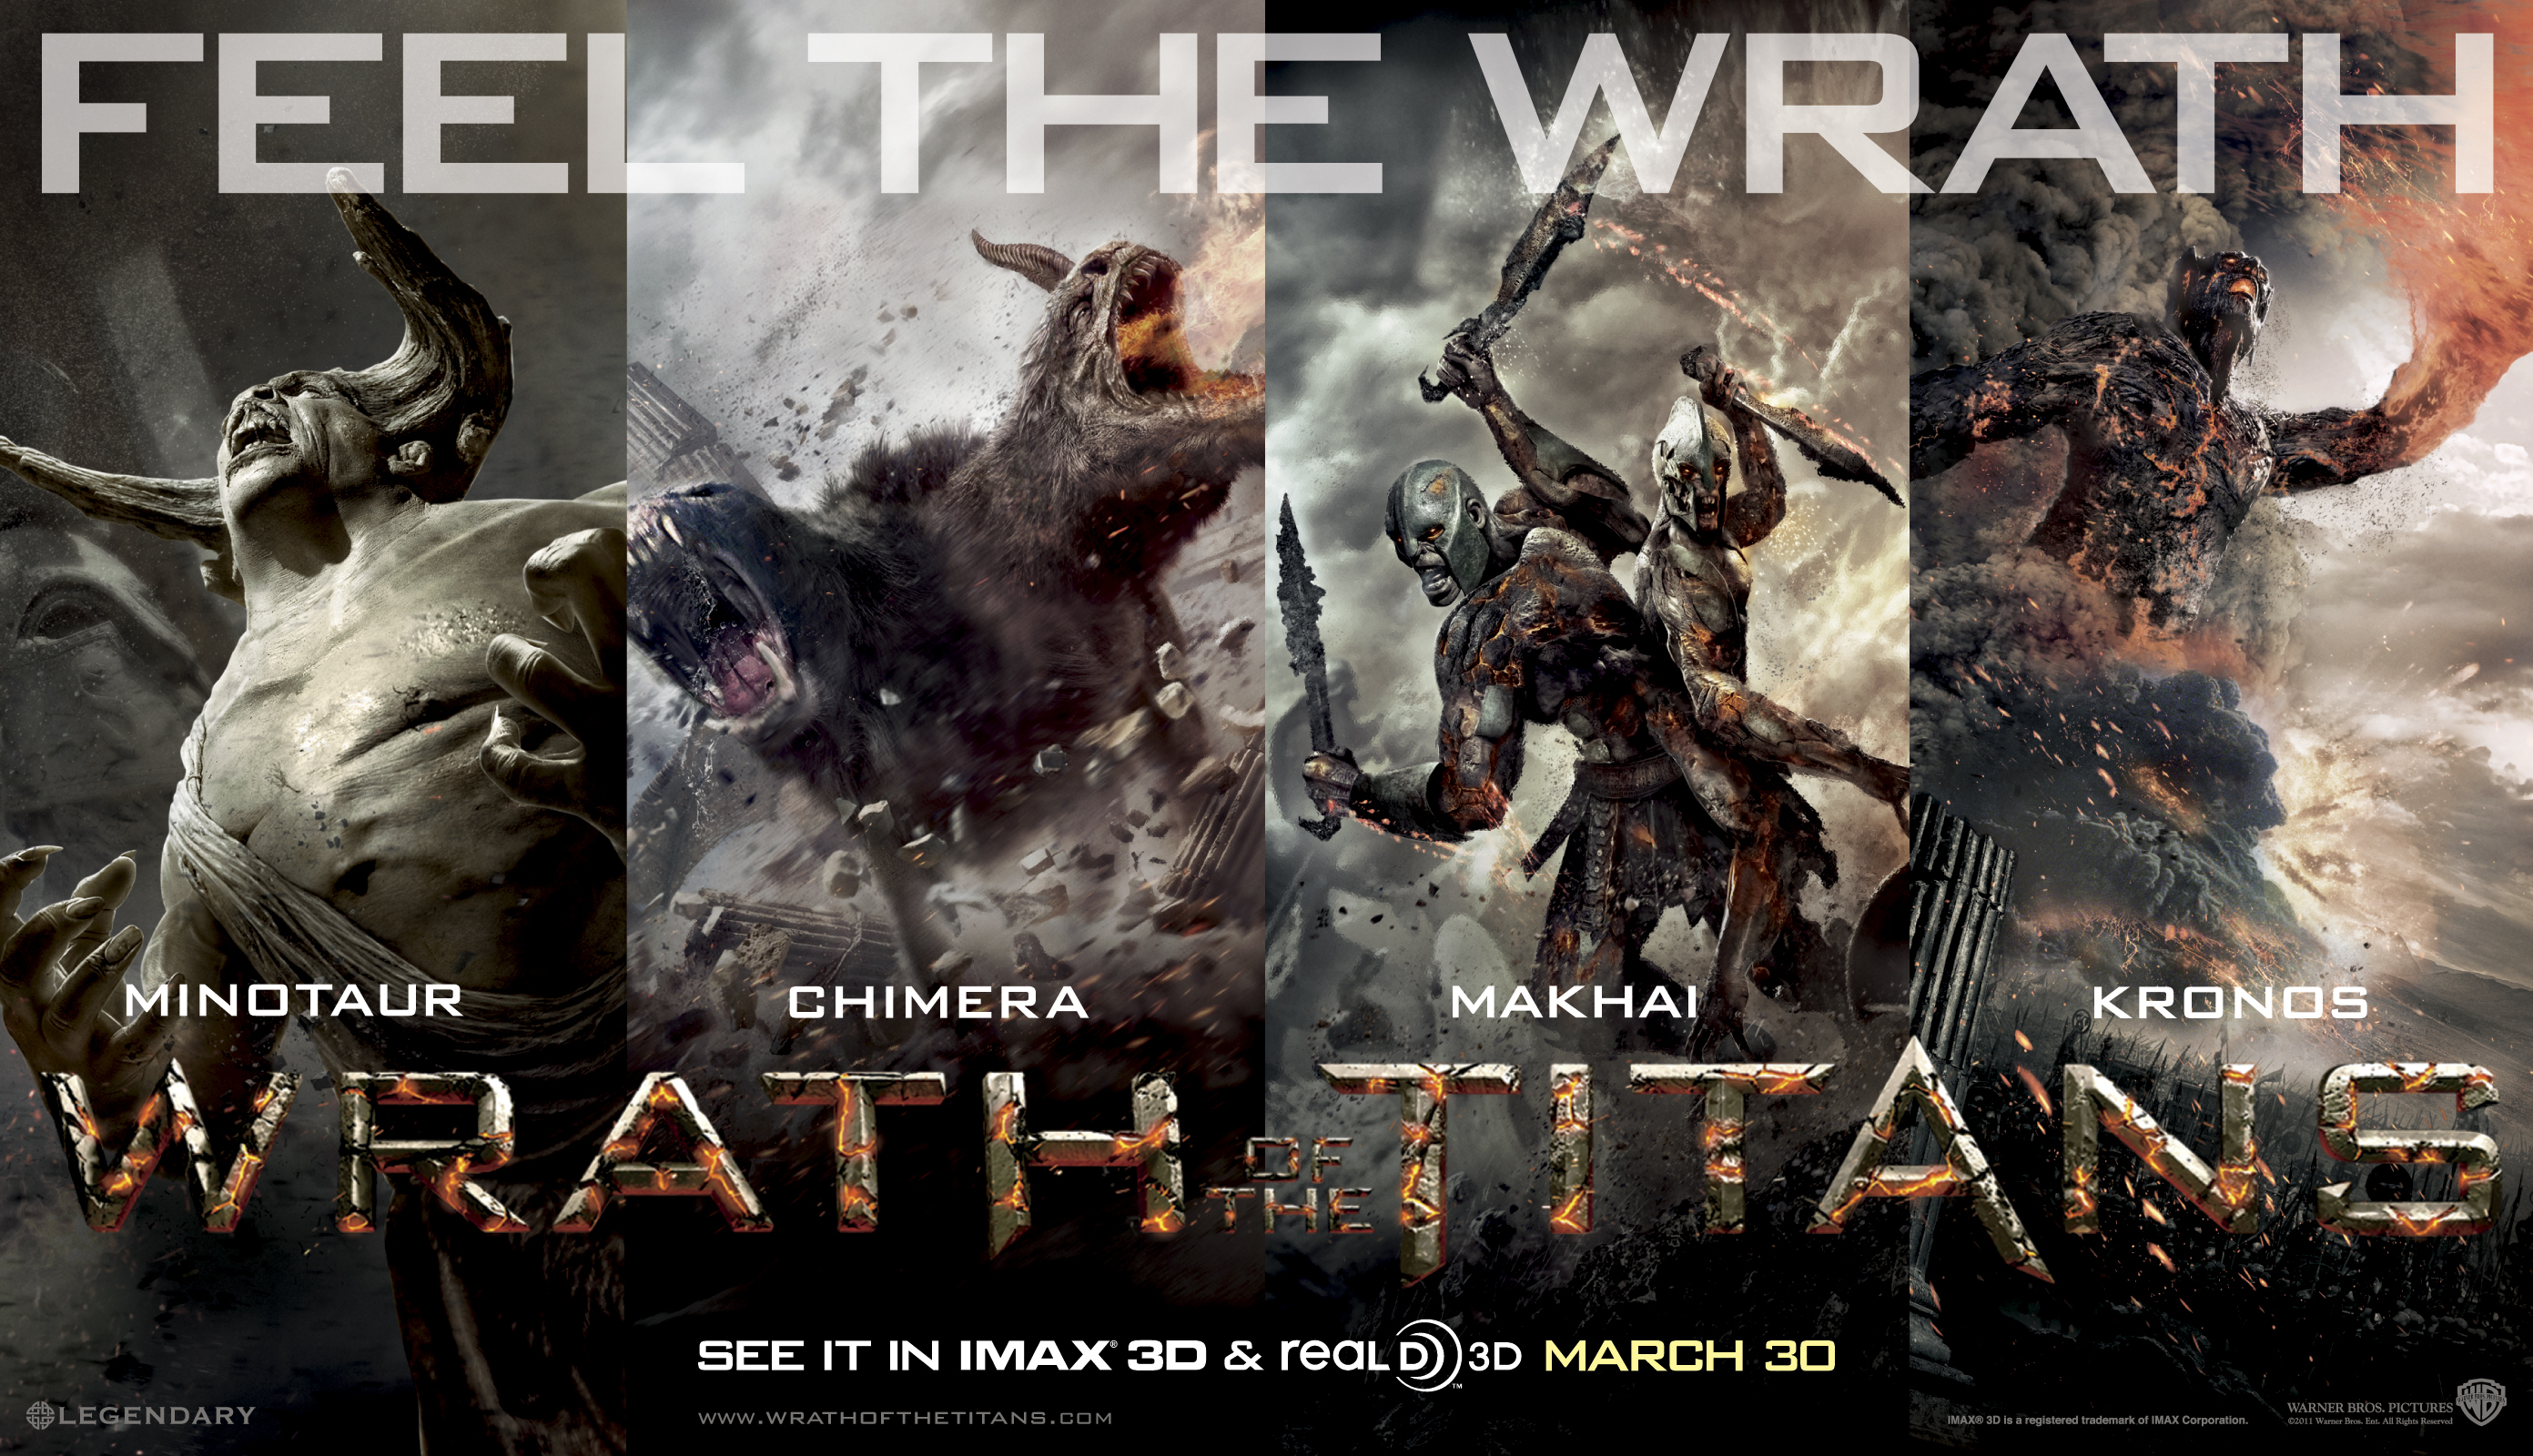 HQ Wrath Of The Titans Wallpapers | File 3517.59Kb